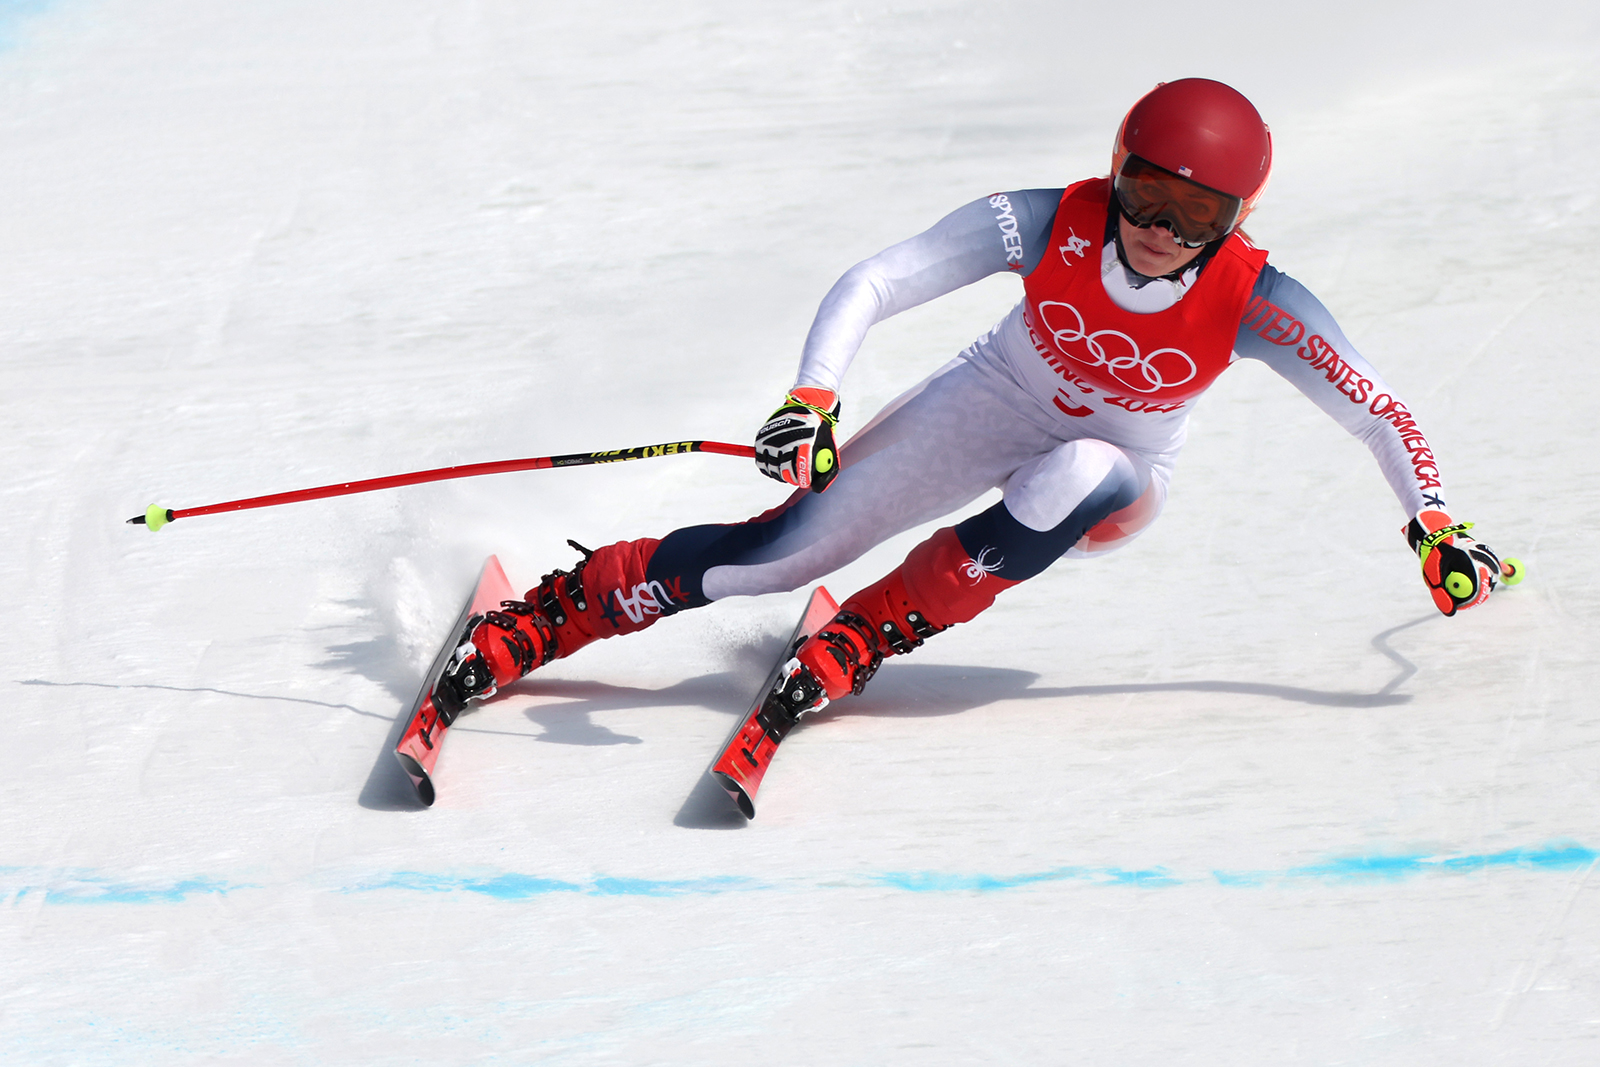 Mikaela Shiffrin of Team United States skis during the Women's Alpine Combined Downhill on February 17.